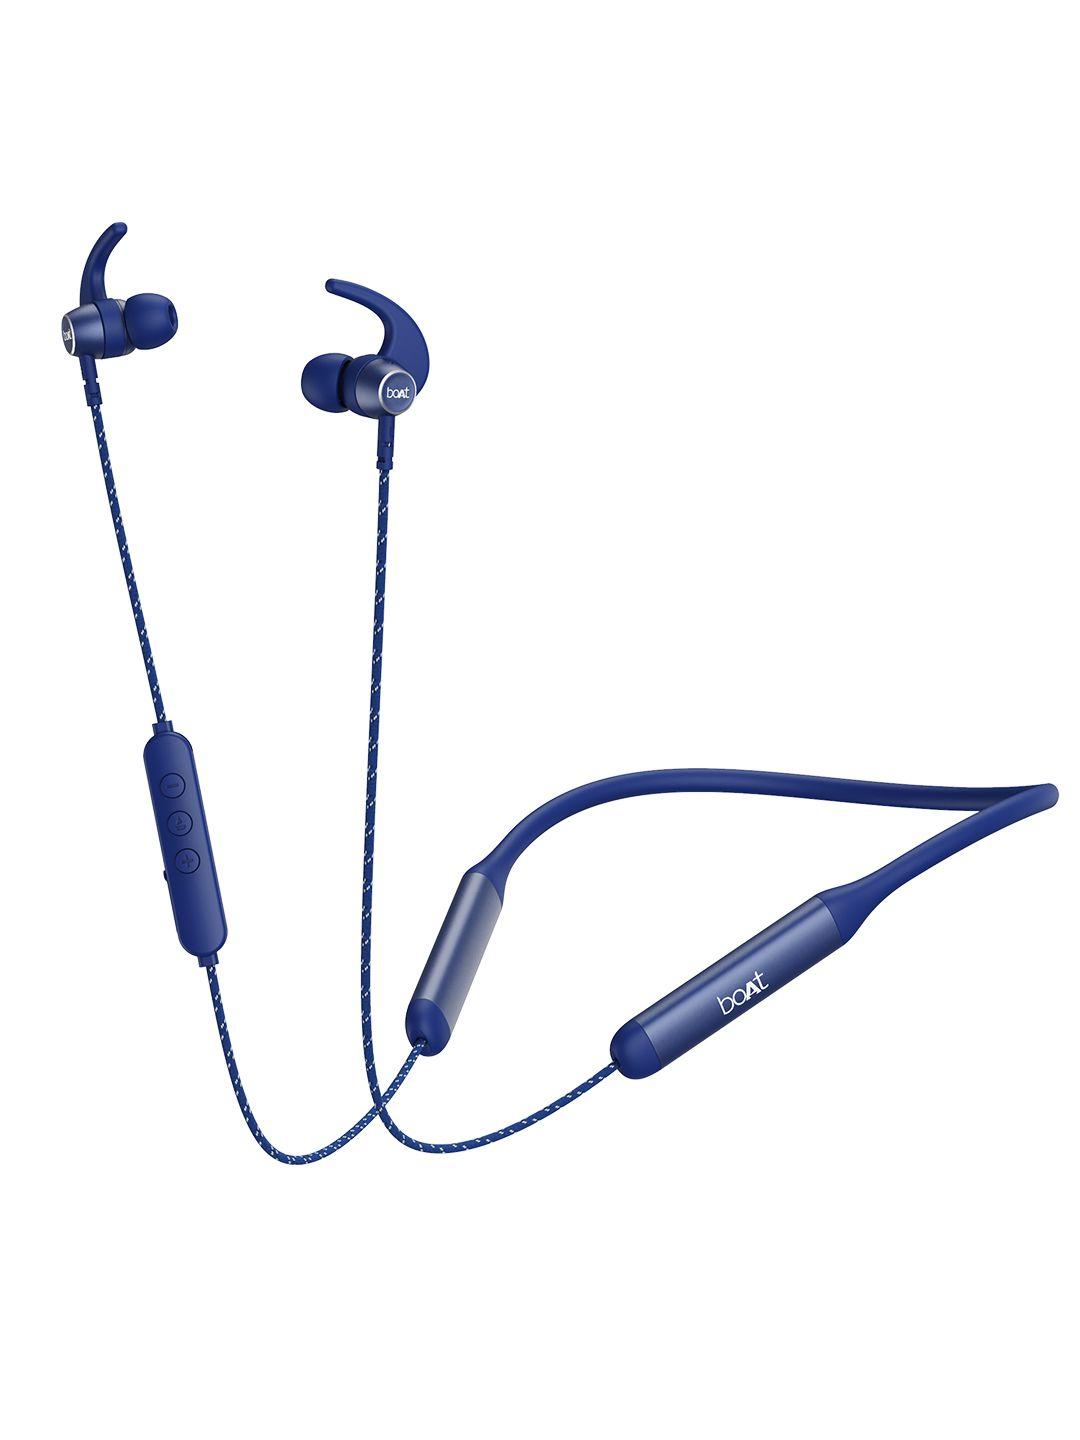 boat rockerz navy blue 333 pro m with 60 hours battery bluetooth headset